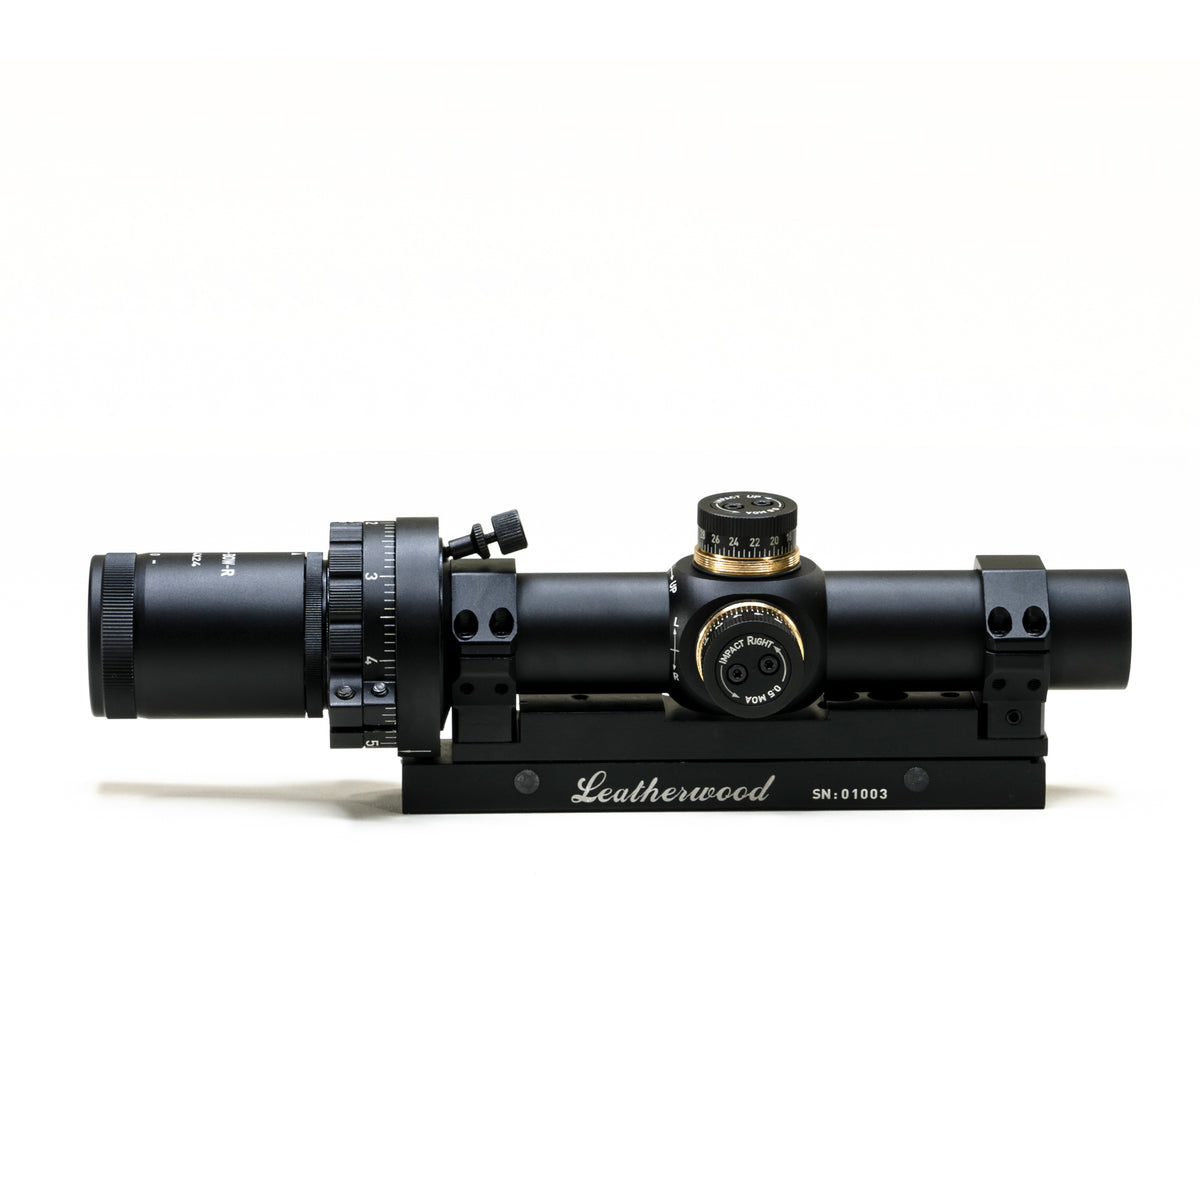 ART X-BOW Crossbow Scope Front View nocap